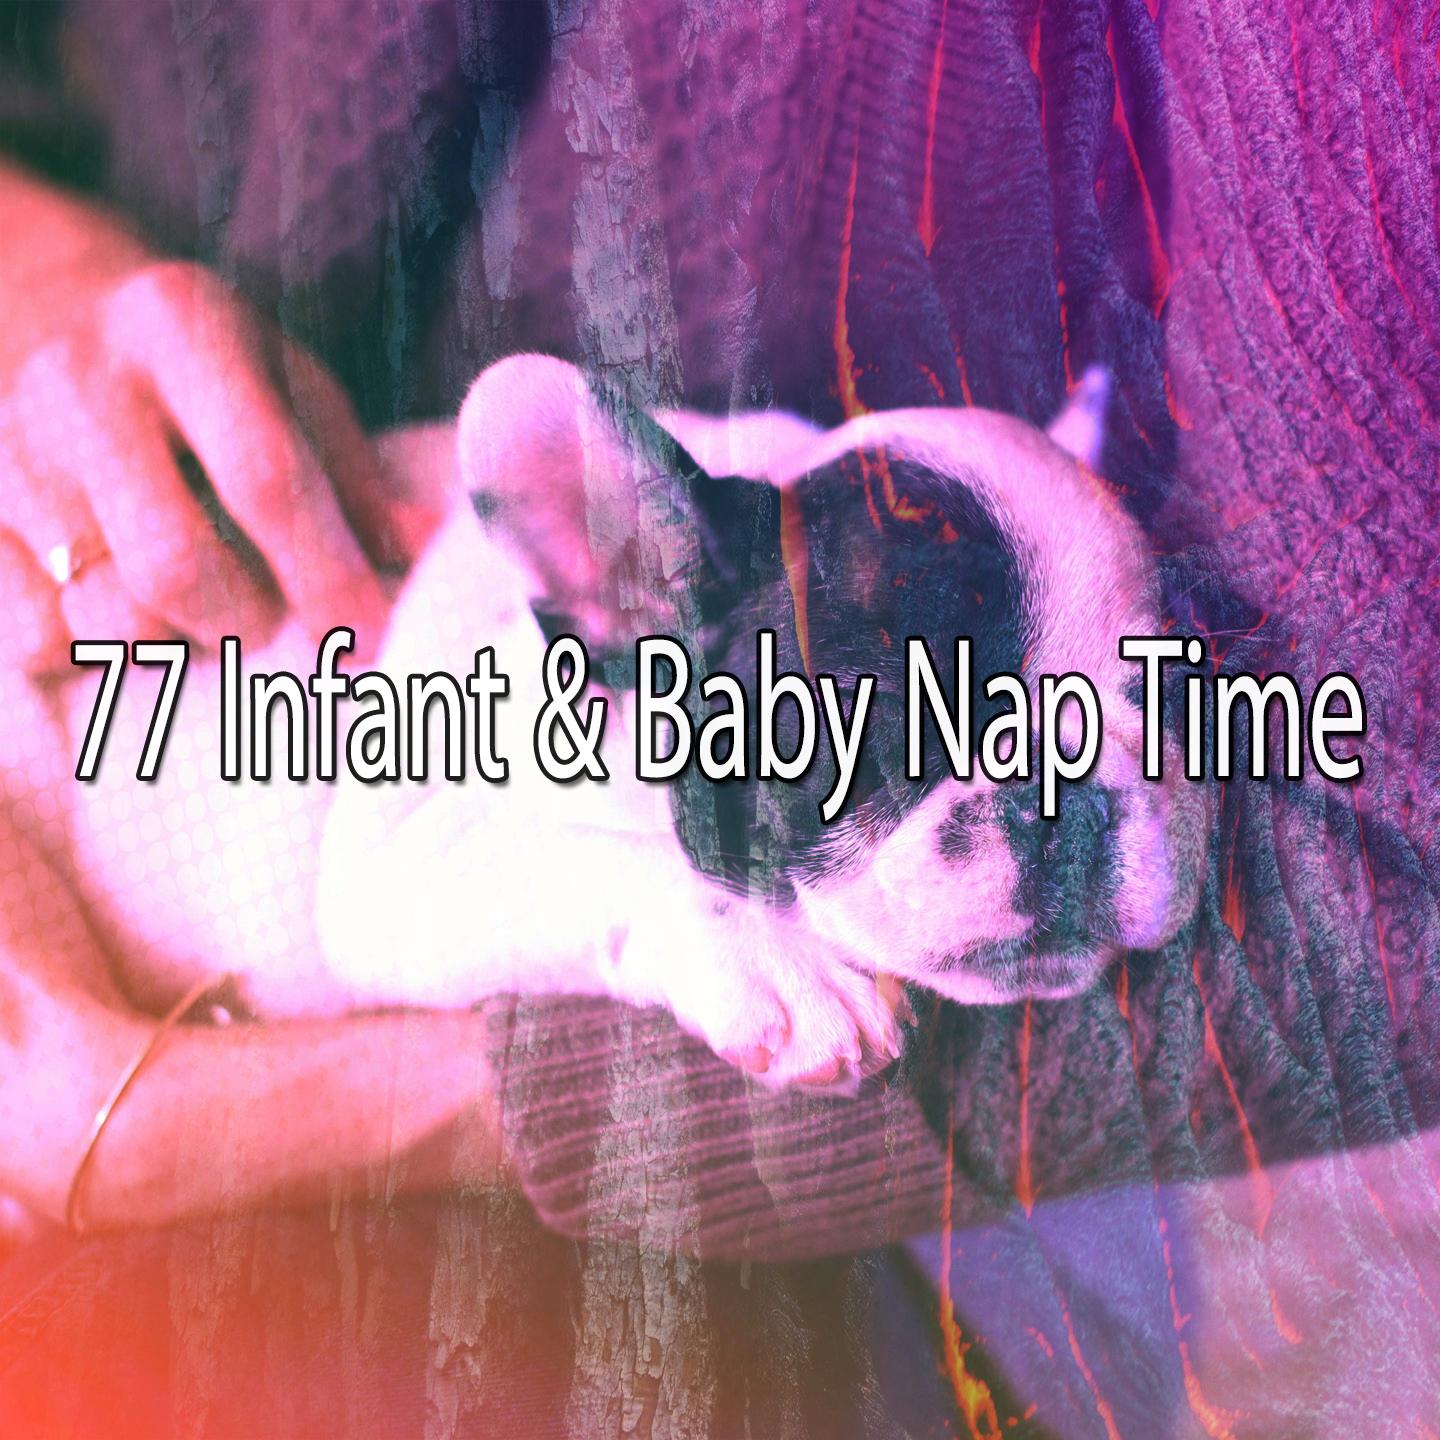 77 Infant & Baby Nap Time